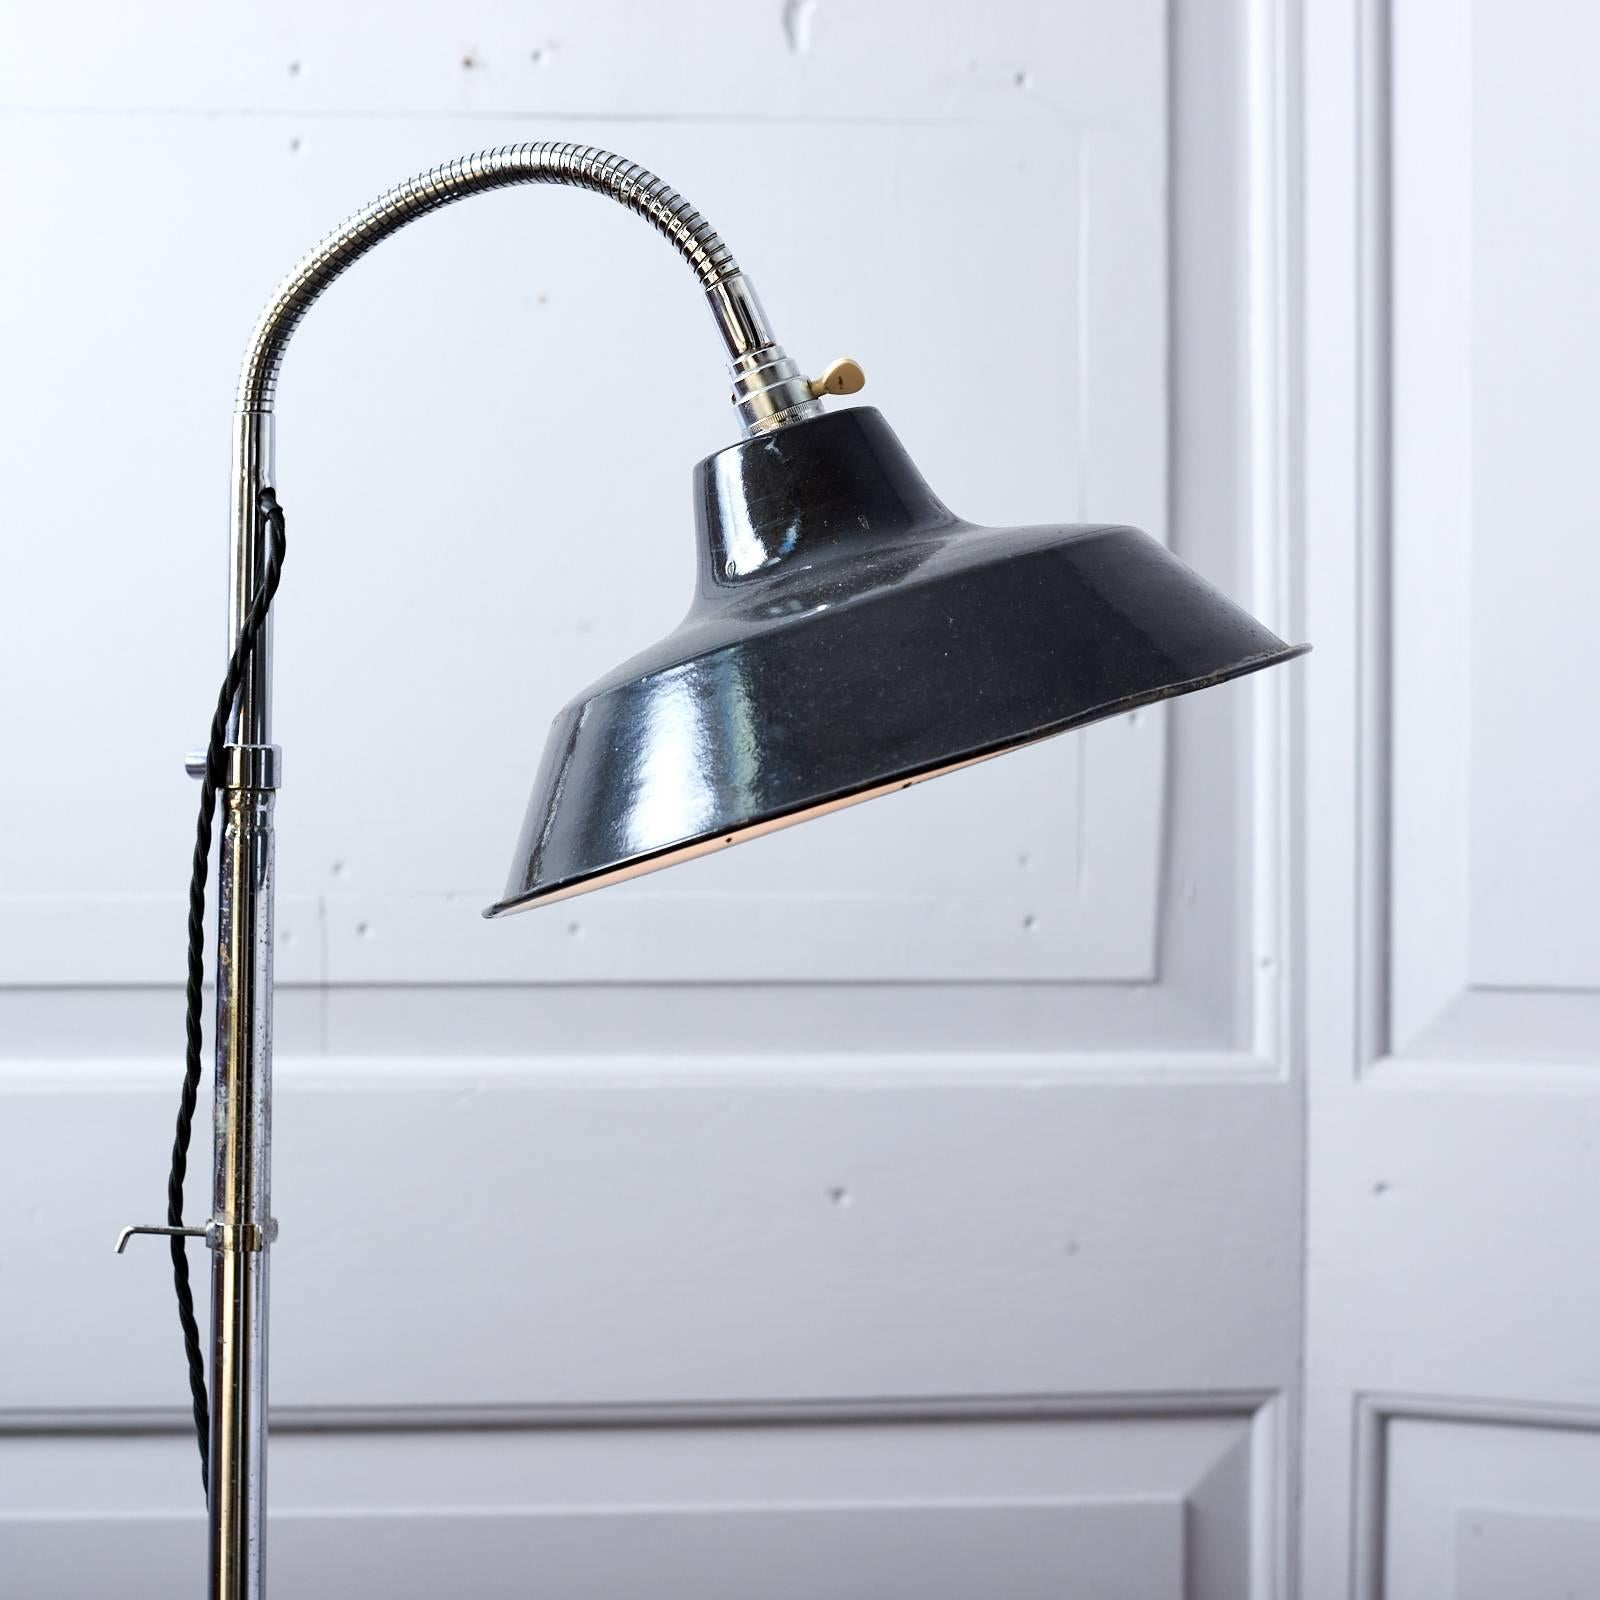 The chrome telescopic angle poise has Bakelite switch on reclaimed enamel shade with elongated goose neck and two meters flex.